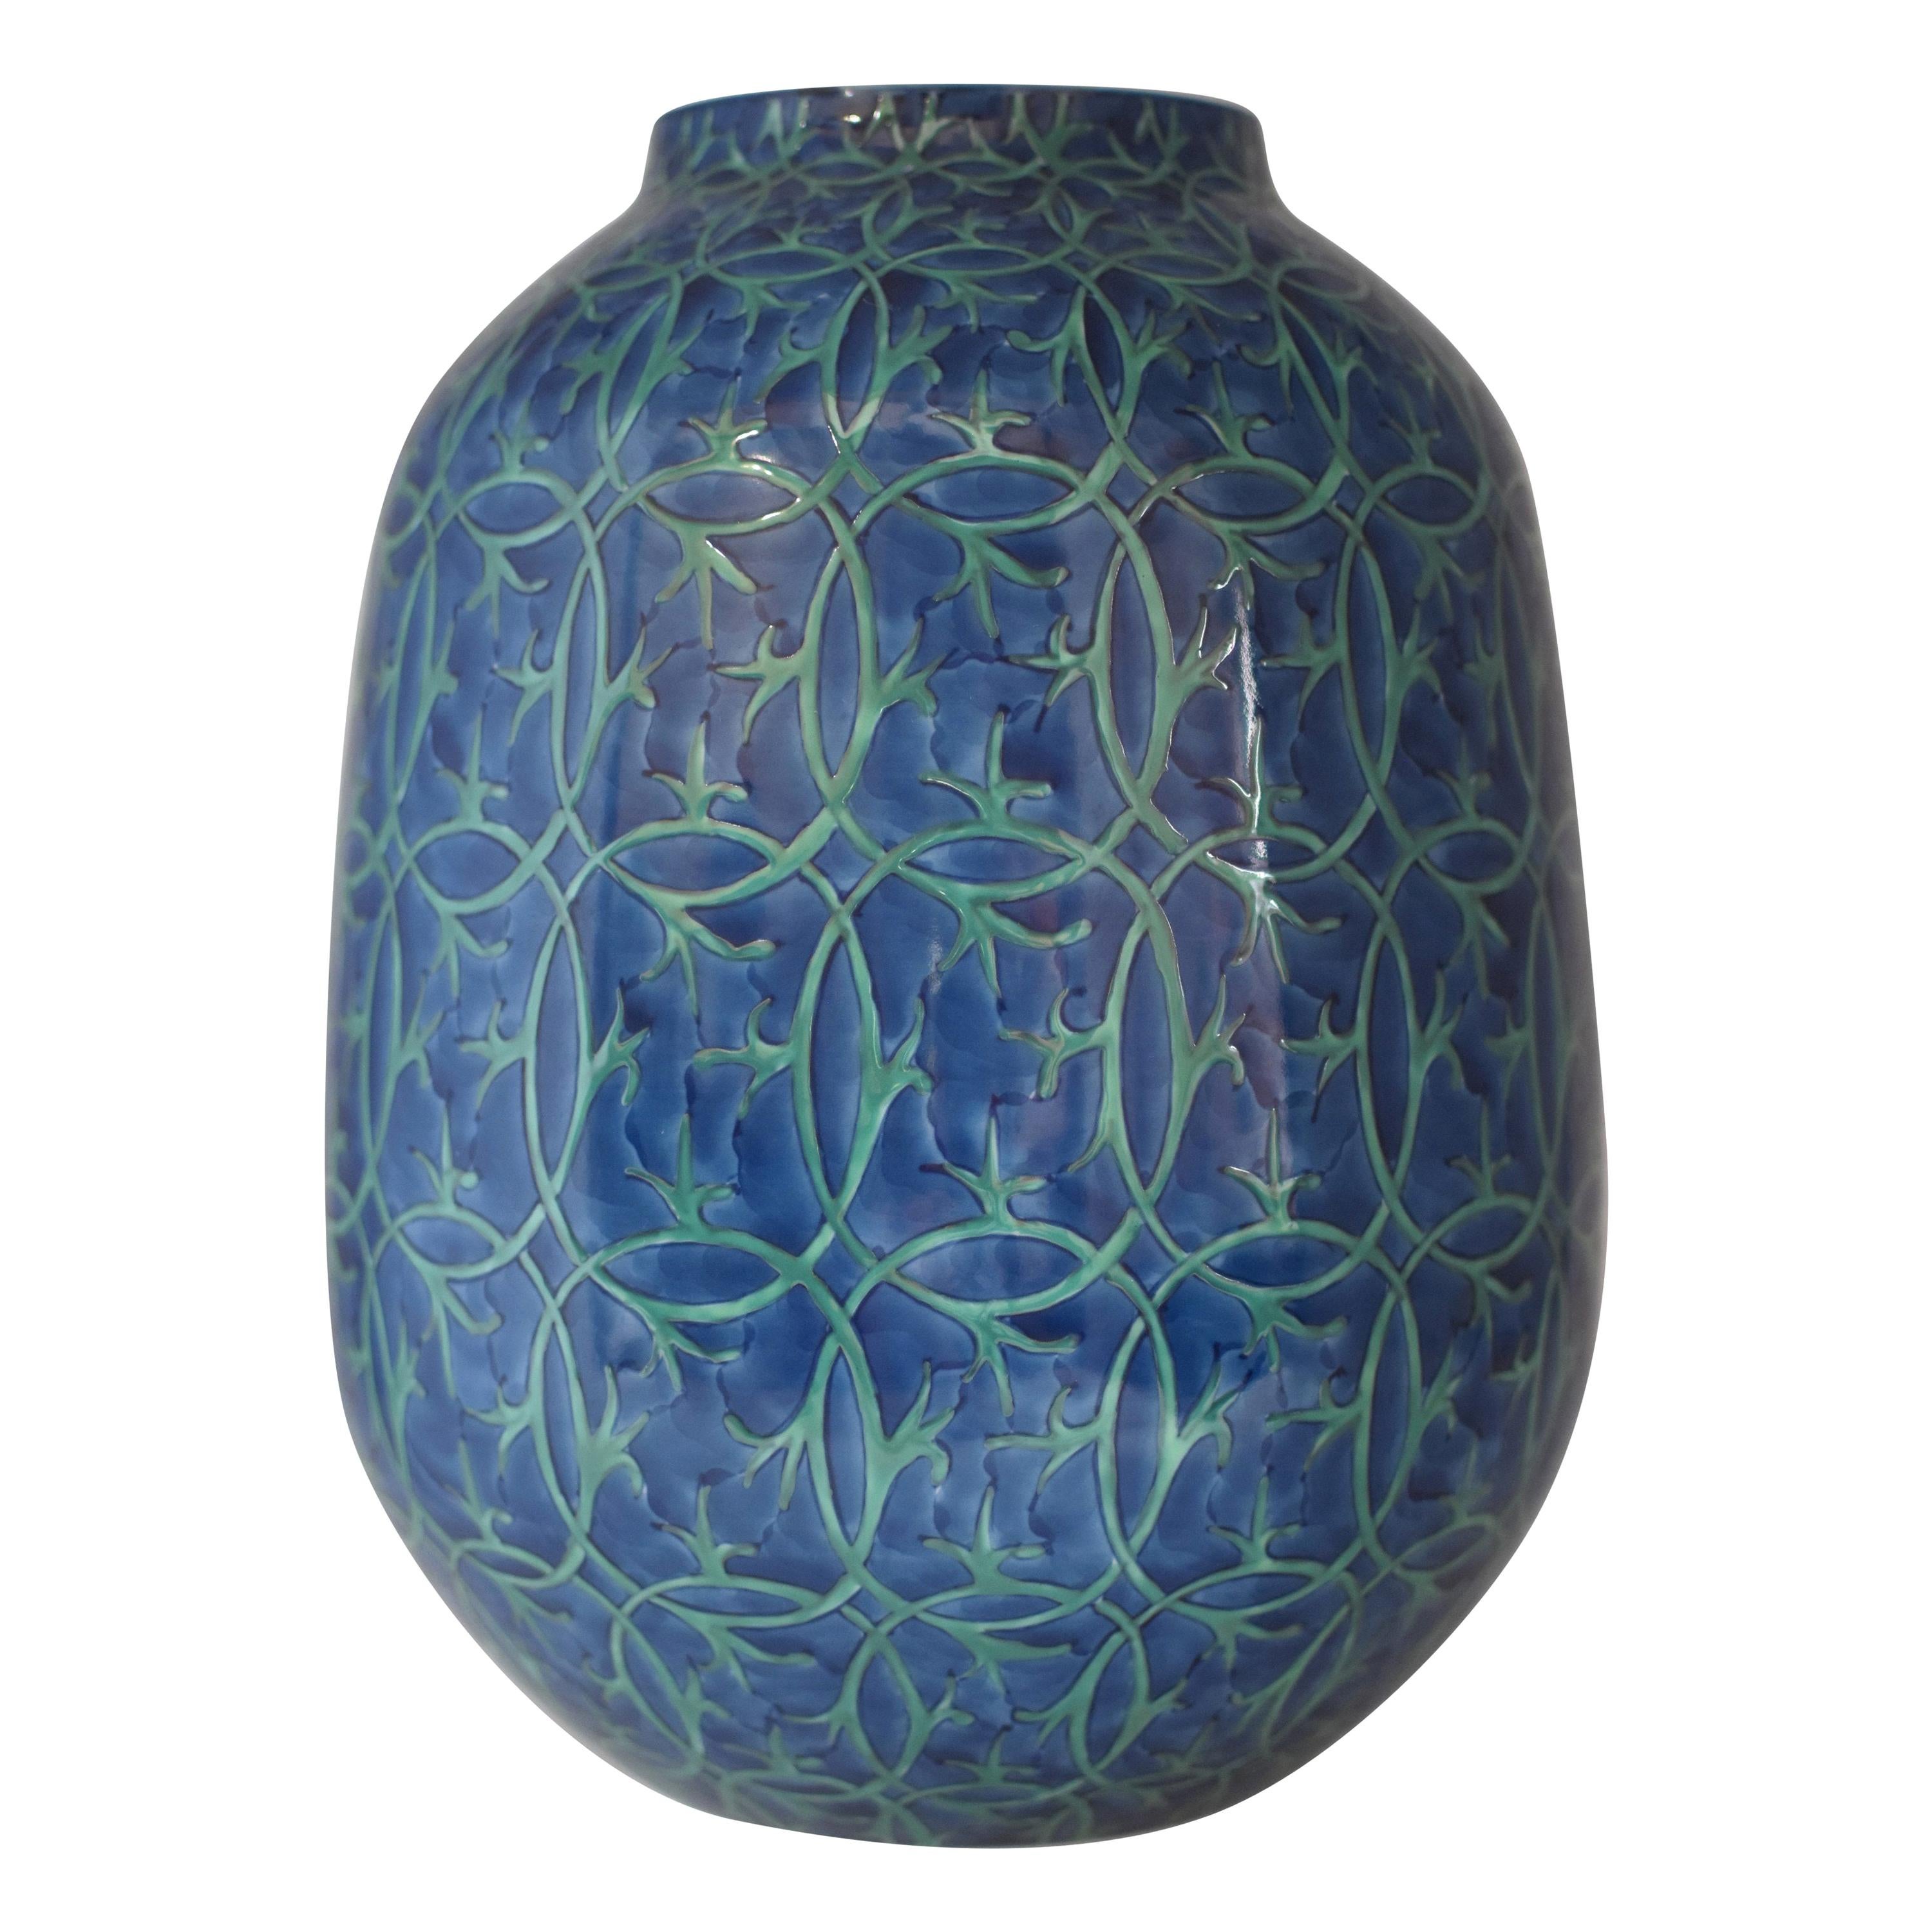 Japanese Blue and Green Porcelain Vase by Contemporary Master Artist For Sale